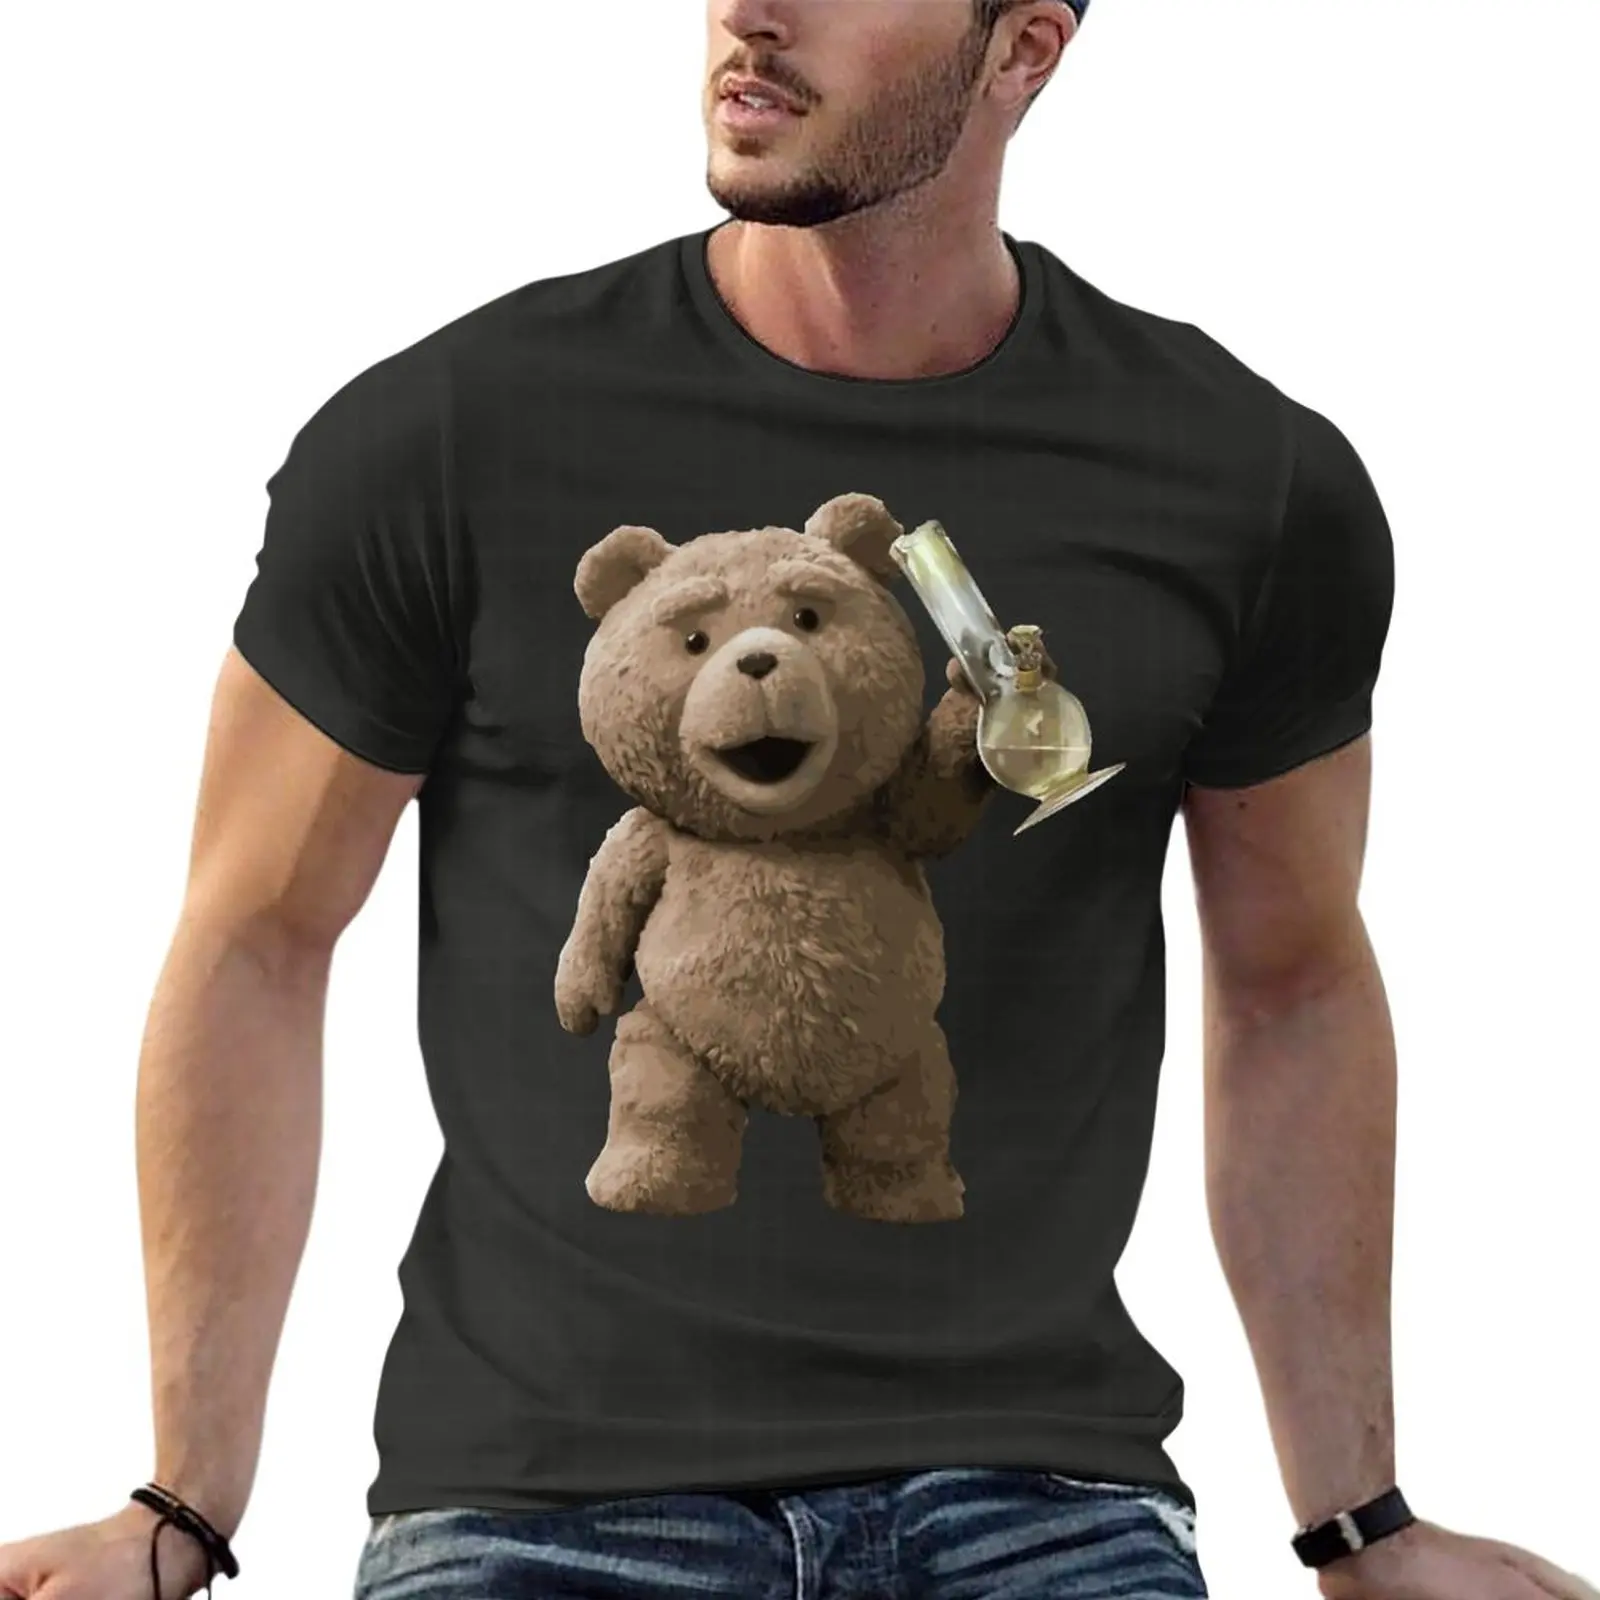 

Ted Bong Cult Fun Funny Movie Oversized T Shirts Harajuku Mens Clothes 100% Cotton Streetwear Big Size Tops Tee